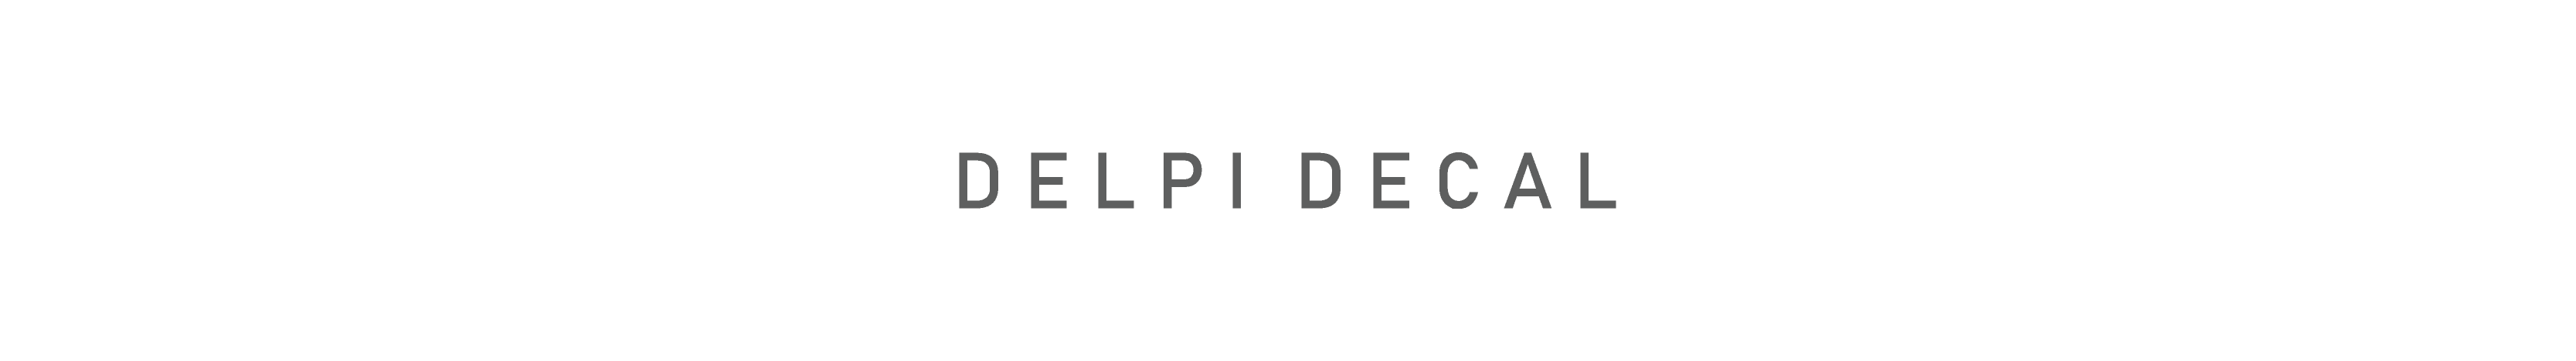 DelpiDecal